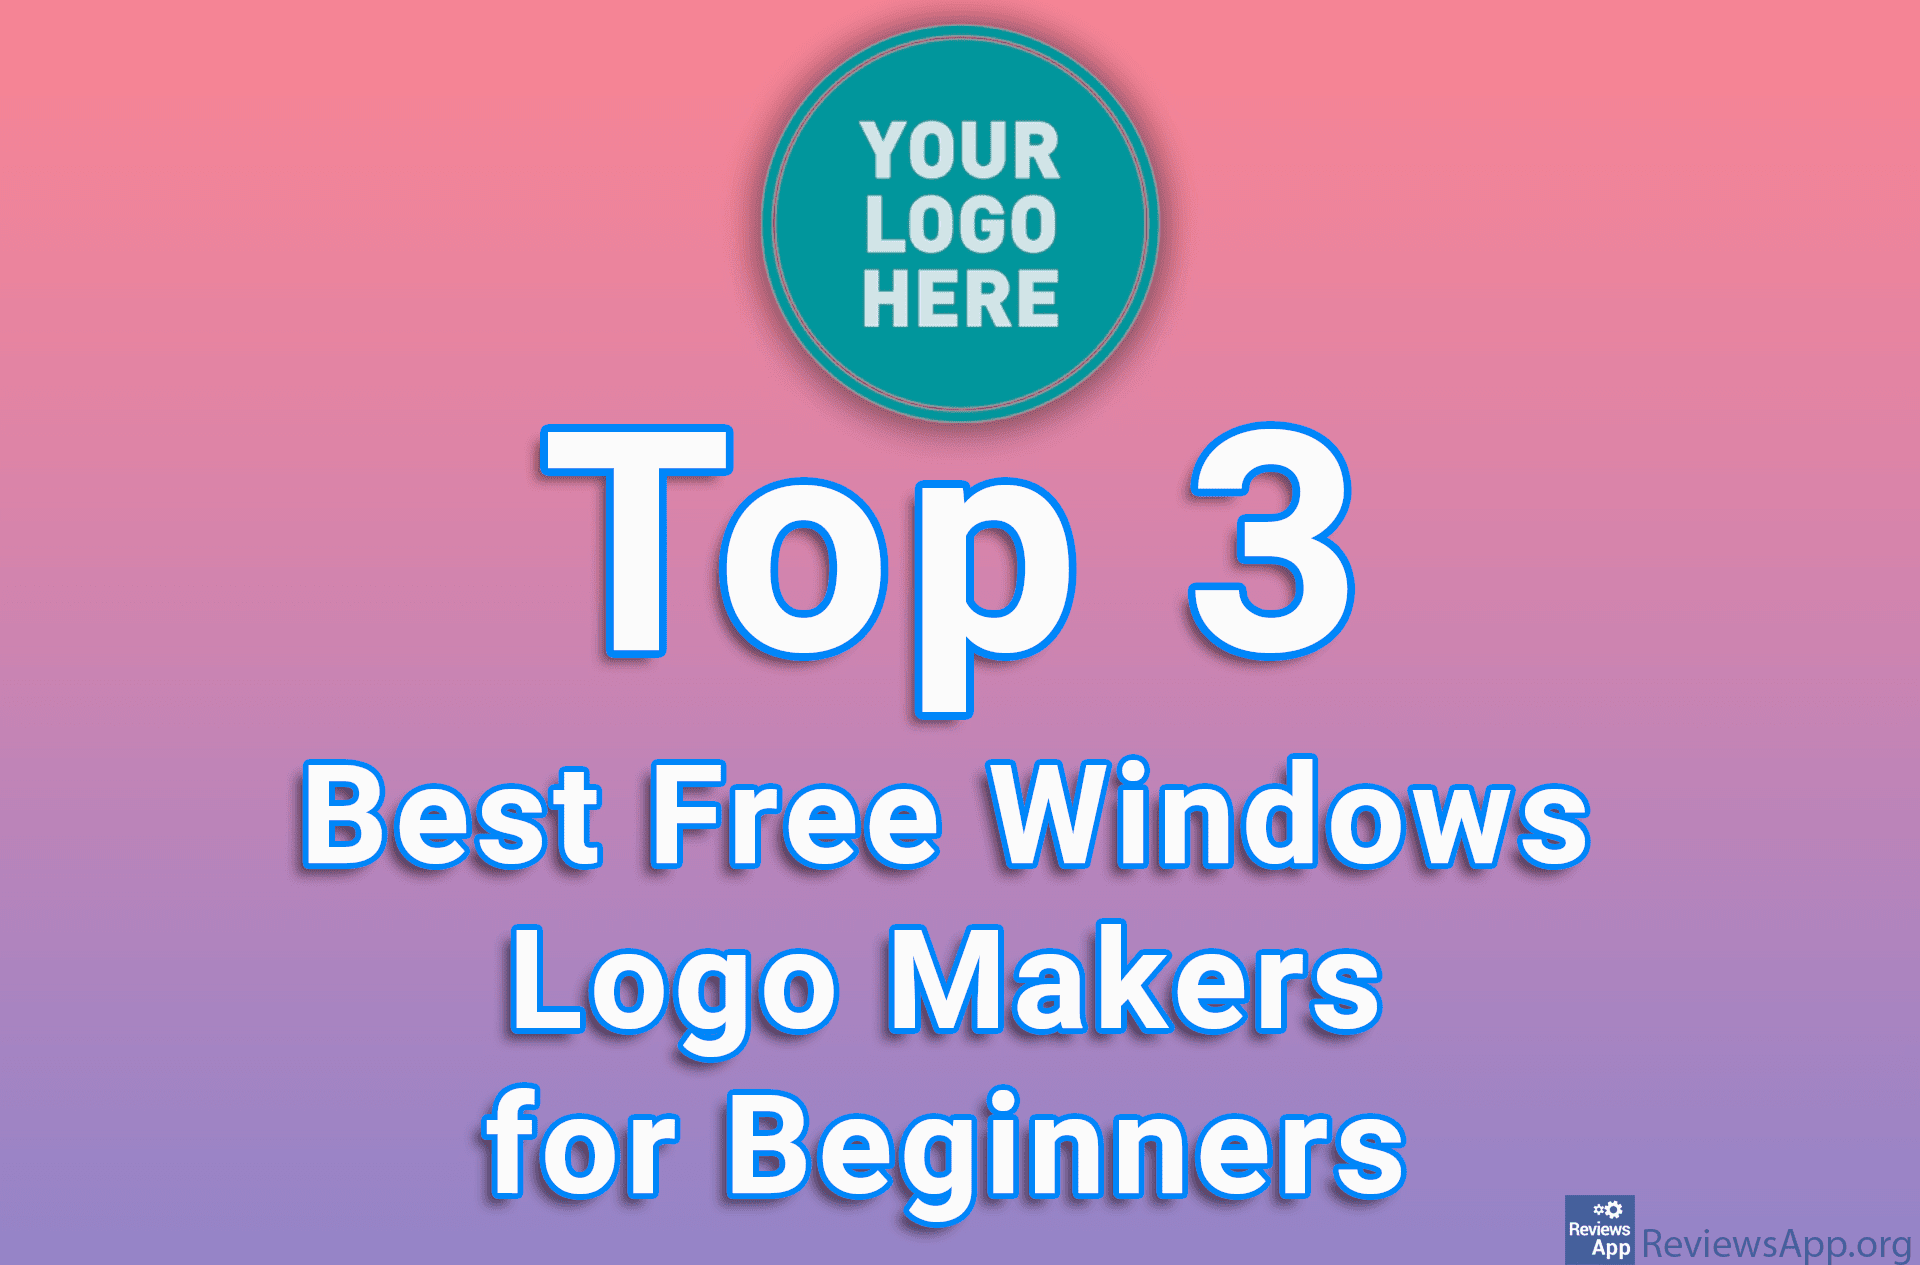 Top 3 Best Free Windows Logo Makers for Beginners